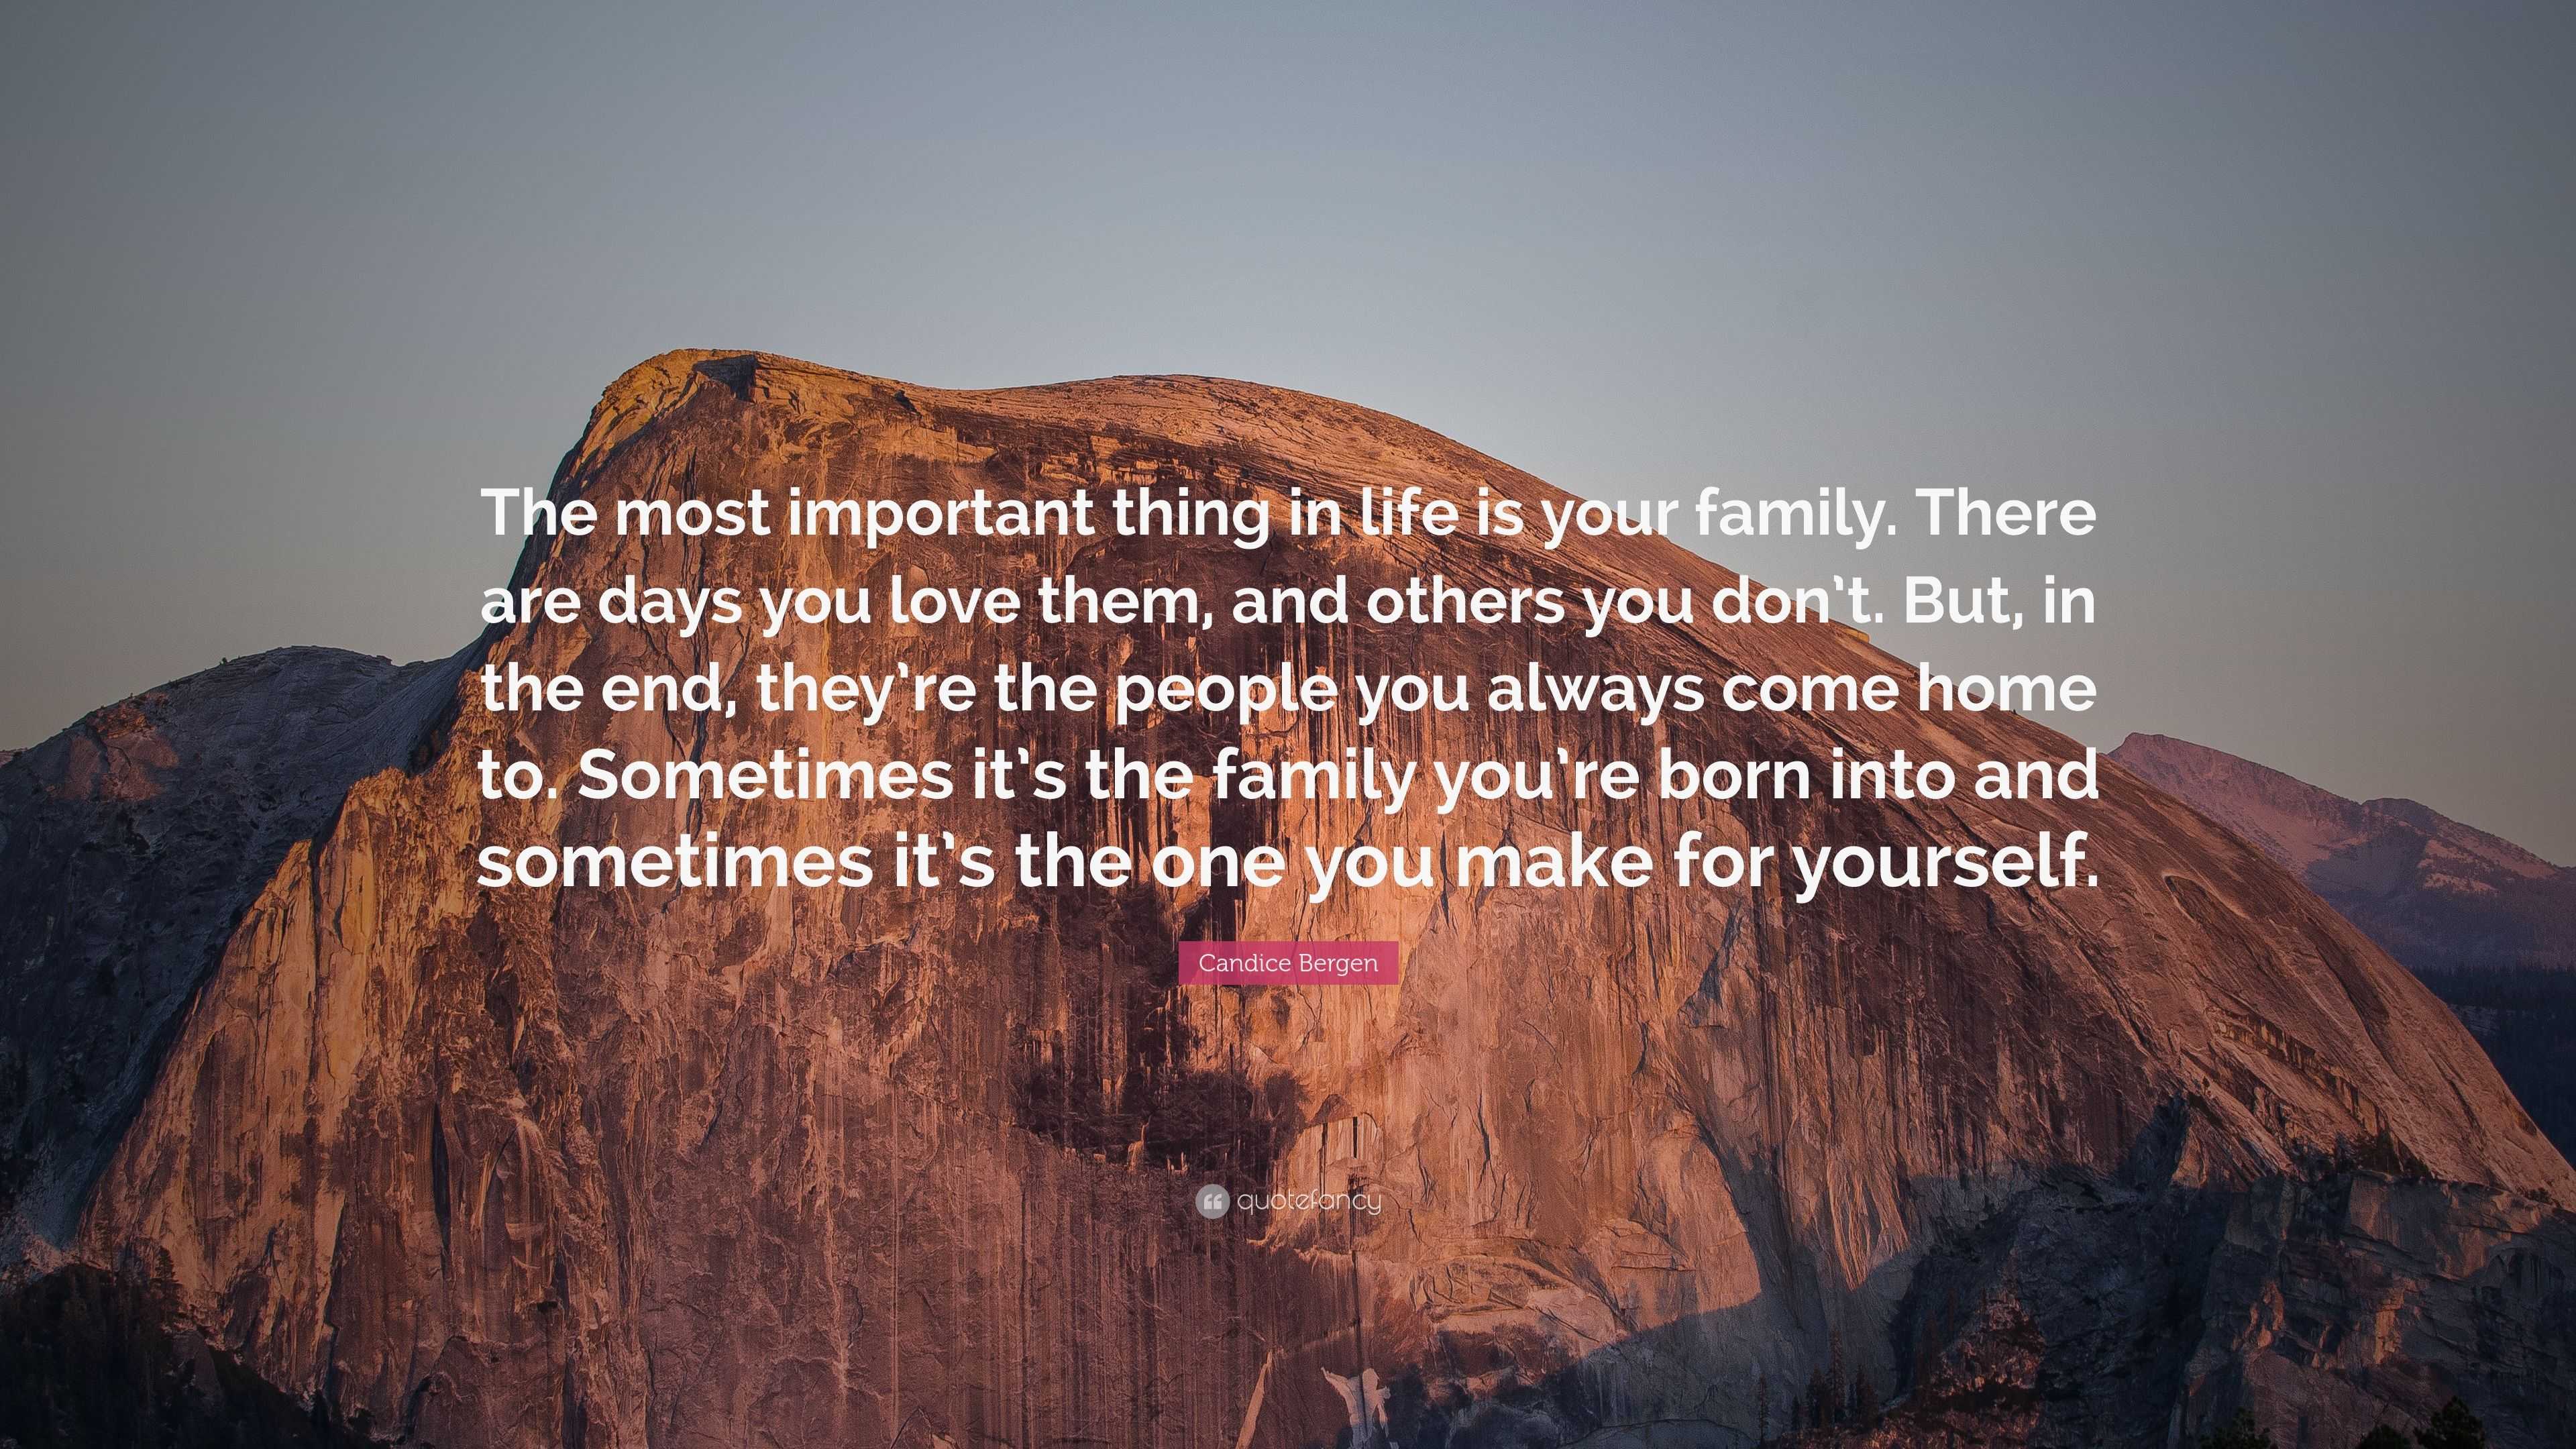 Candice Bergen Quote “The most important thing in life is your family There